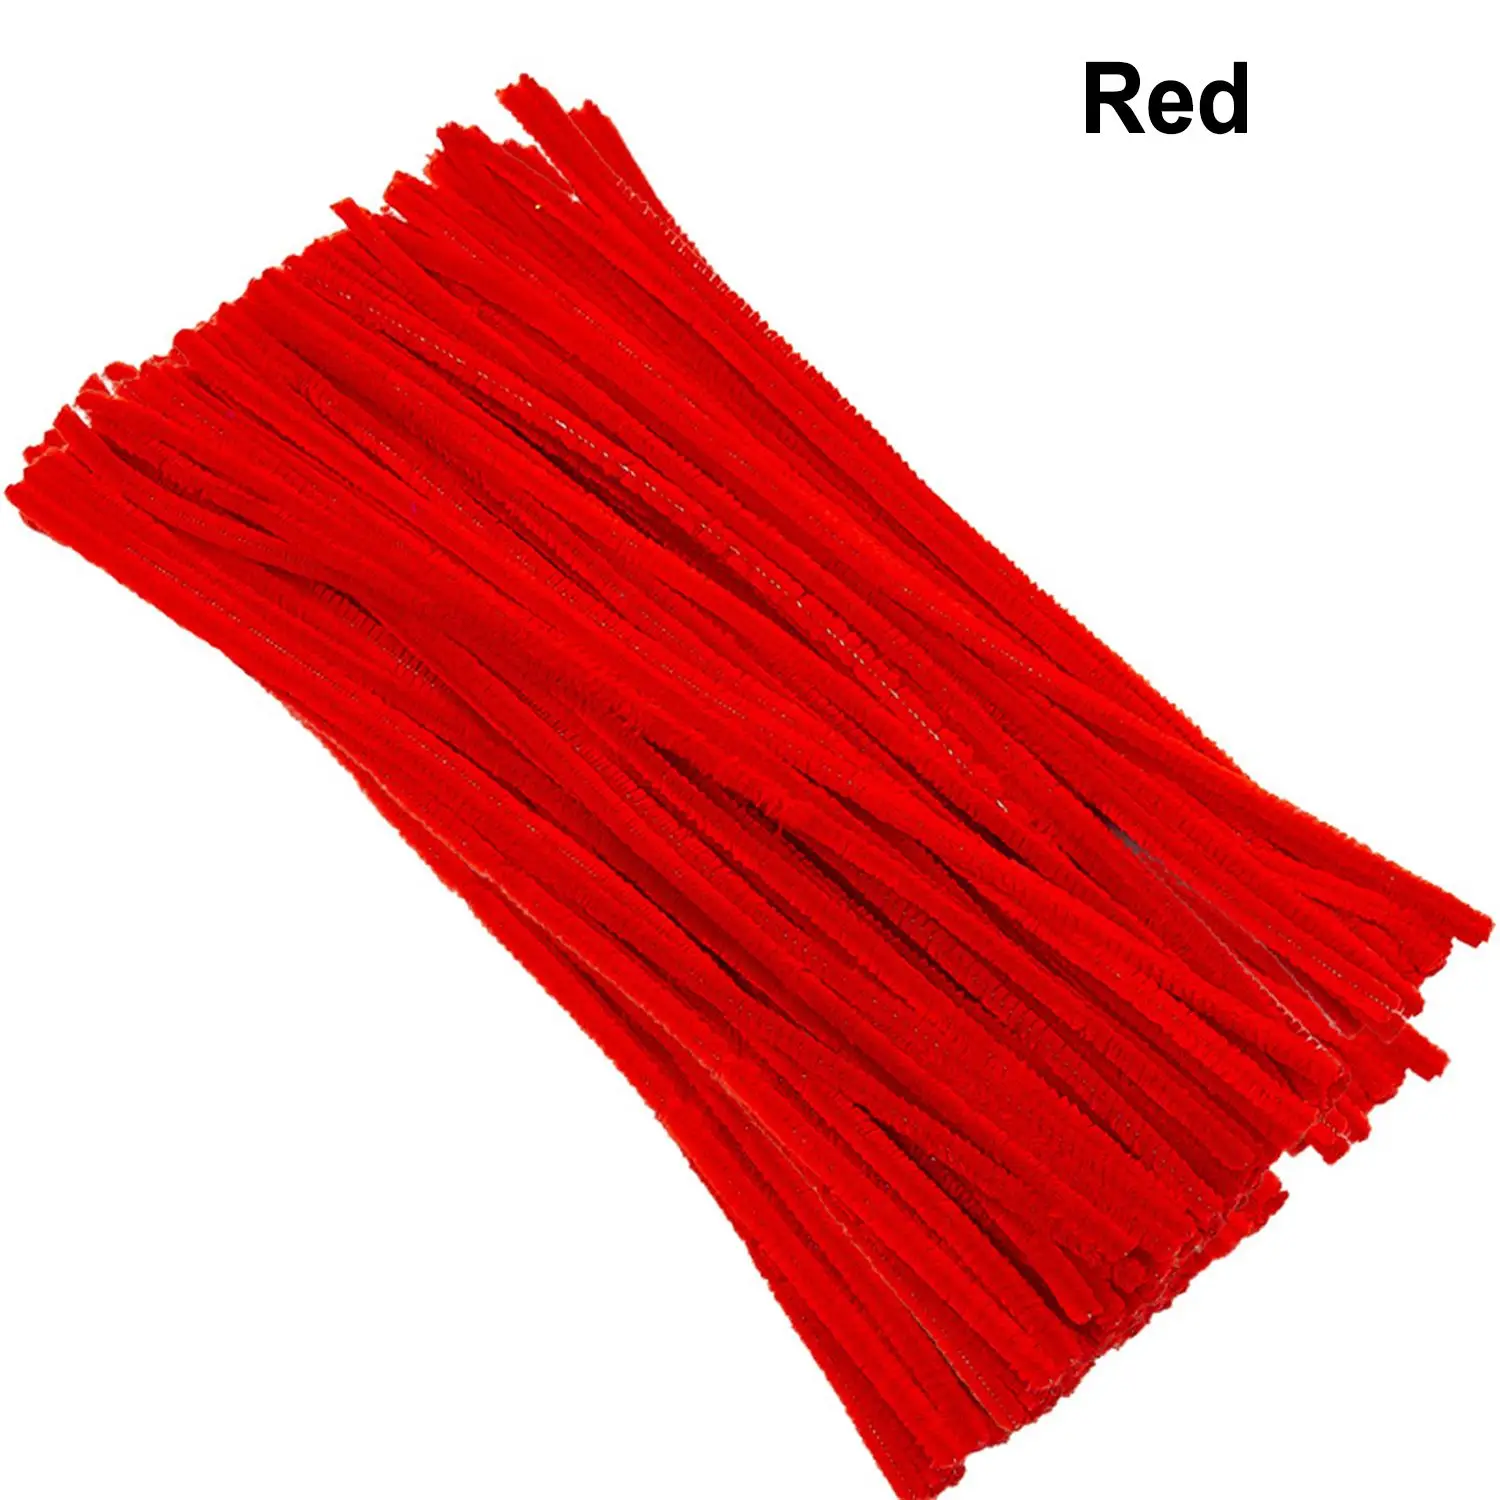 100pcs 30cm Chenille Stems Twist Wire Chenille Stems Pipe Cleaners Handmade  Kids Educational Toys DIY Craft Supplies